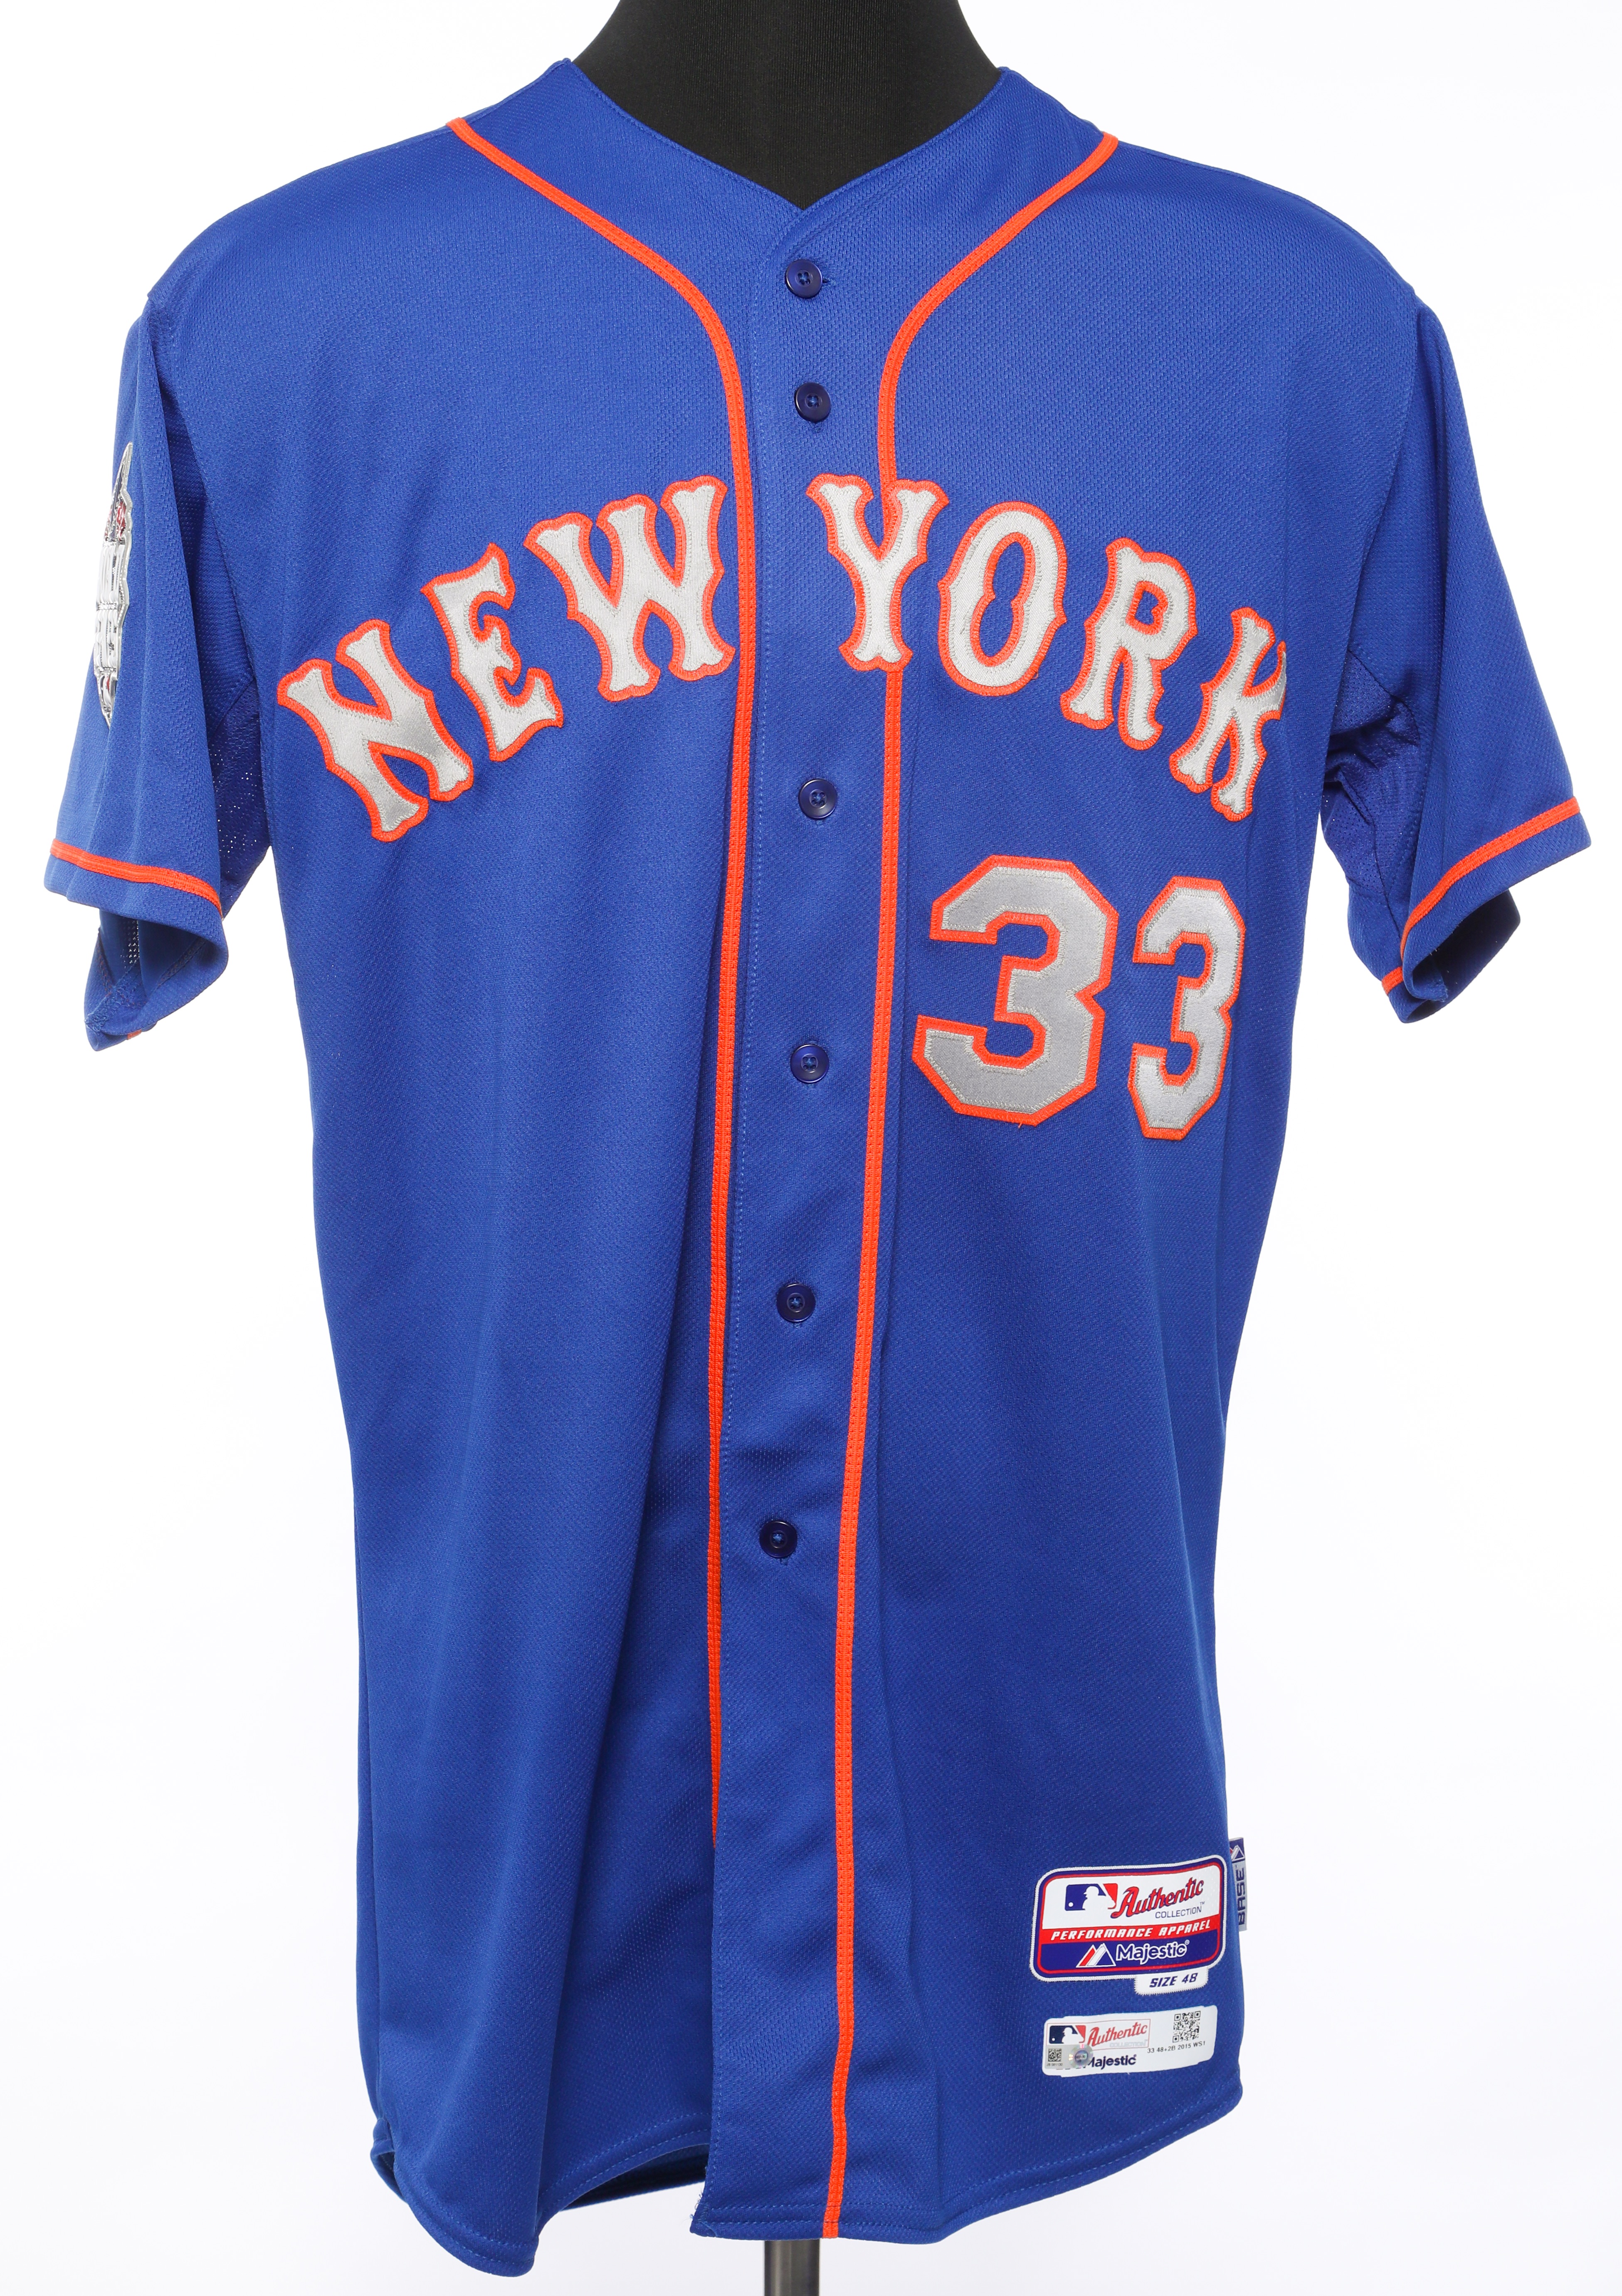 Gil Hodges Jersey - Mets History